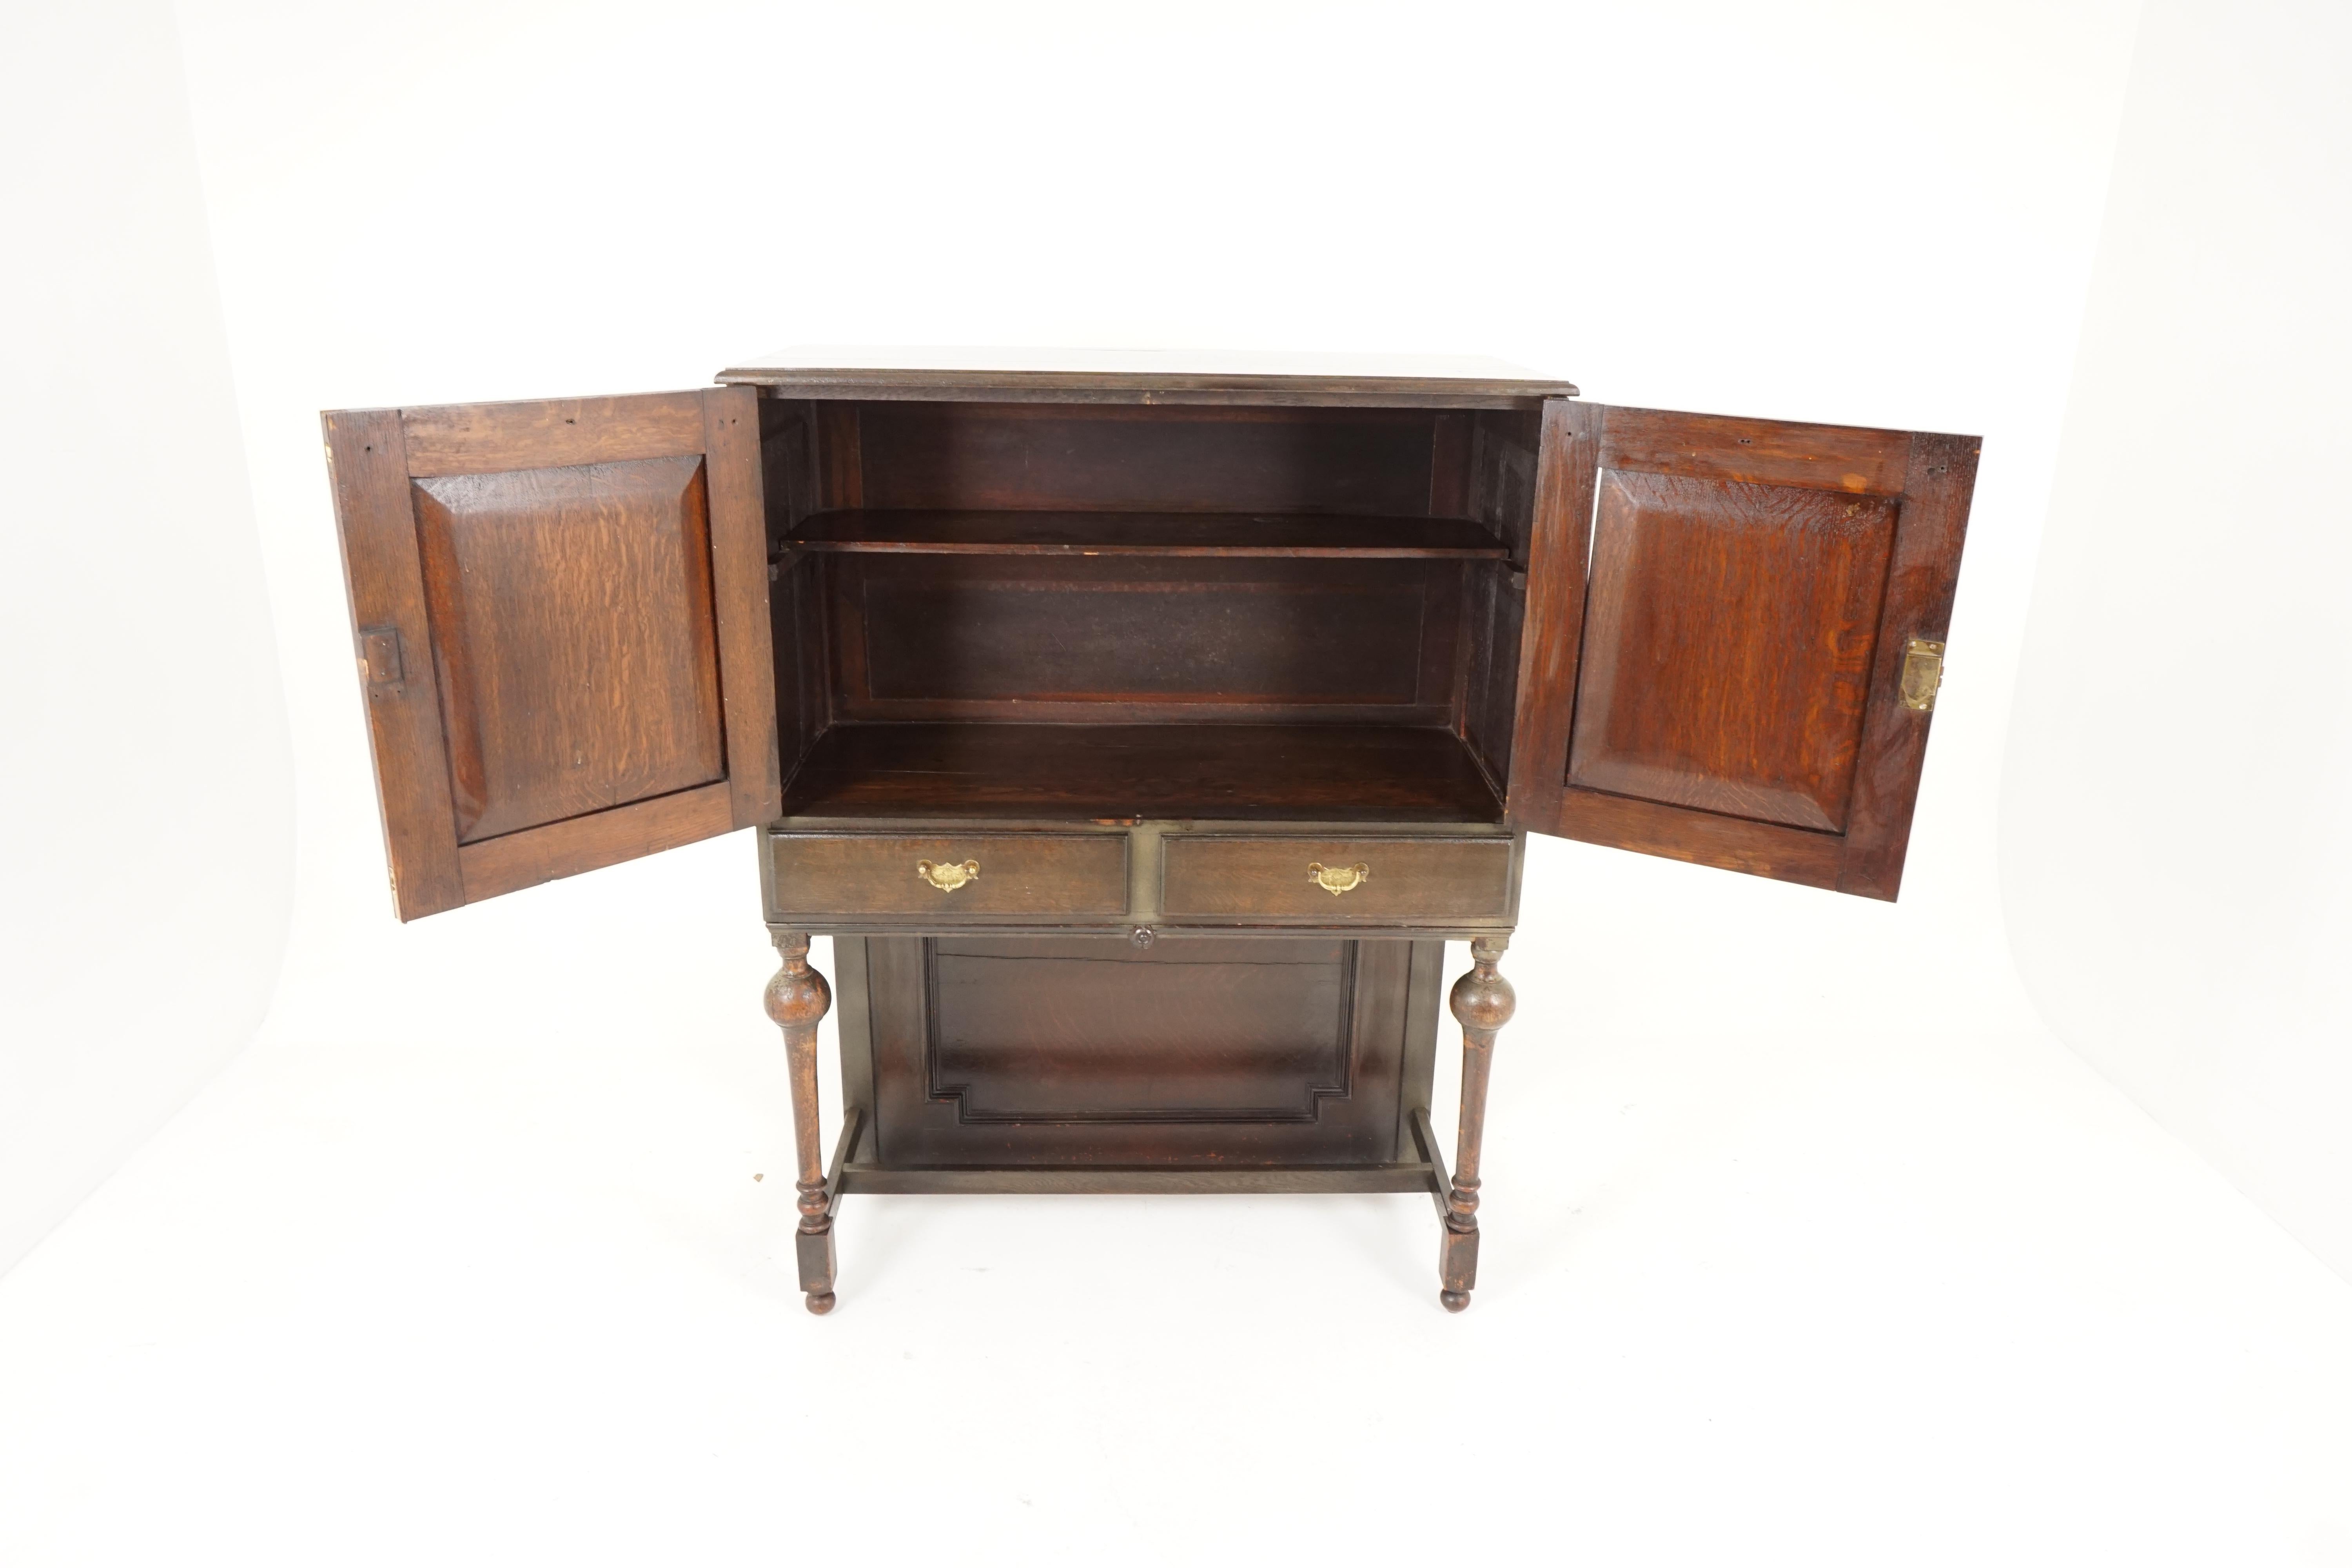 Antique carved oak cabinet on stand, Scotland 1890, H146

Scotland, 1890
Solid oak
Original finish
Rectangular top with moulded edge
Two heavily carved doors with fielded panels to the front open top reveal a single shelf
Pail of paneled drawers